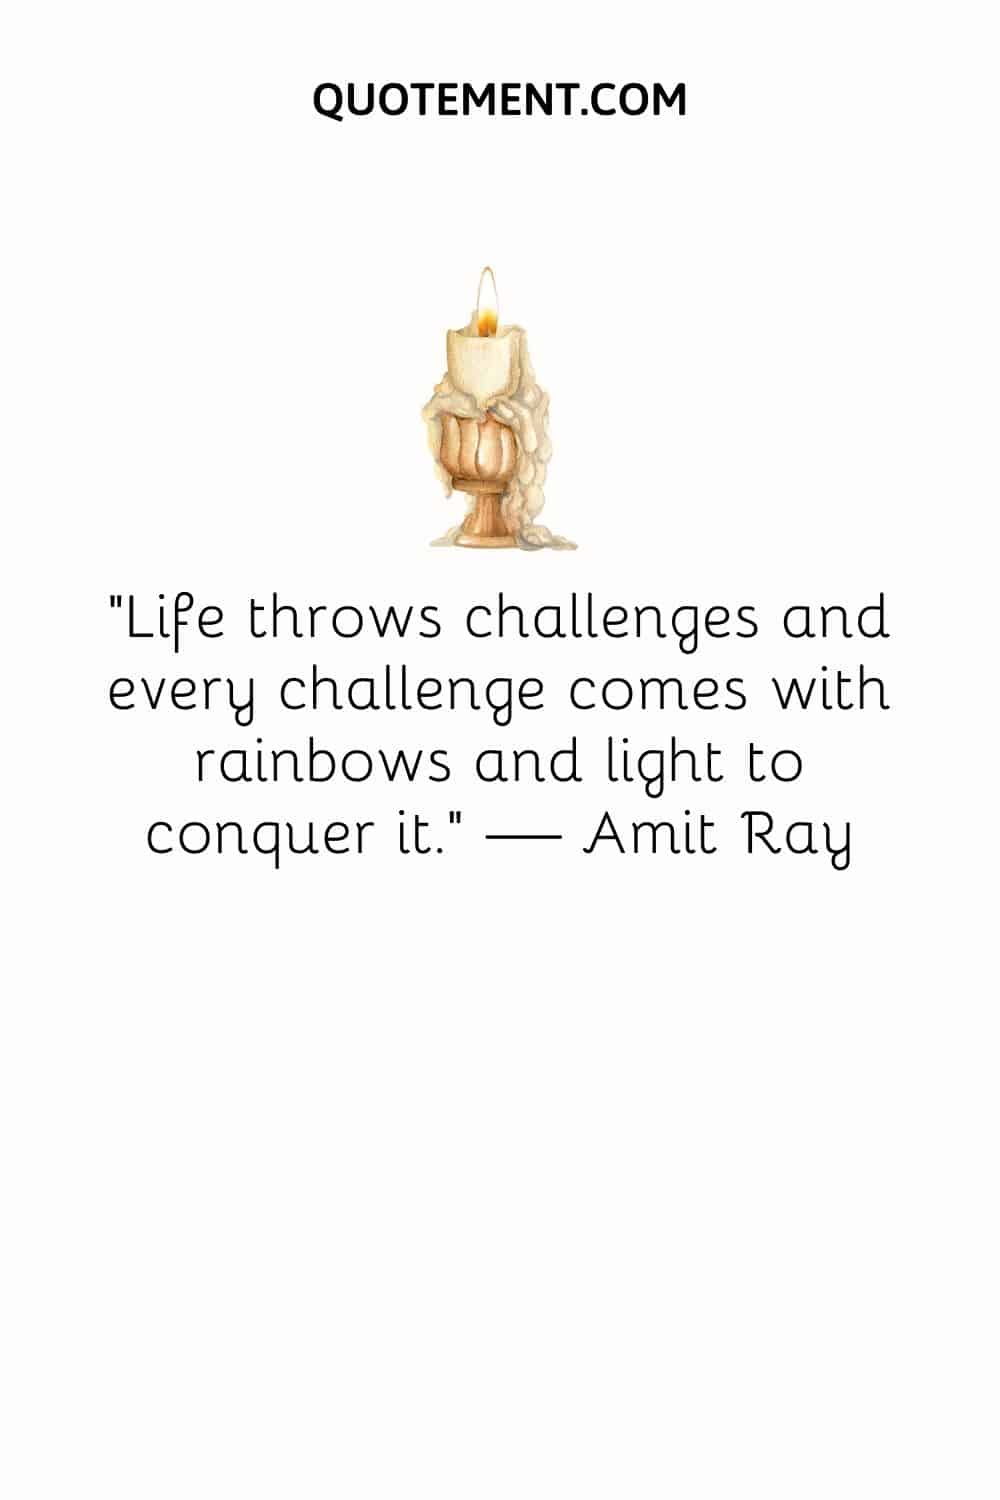 “Life throws challenges and every challenge comes with rainbows and light to conquer it.” — Amit Ray